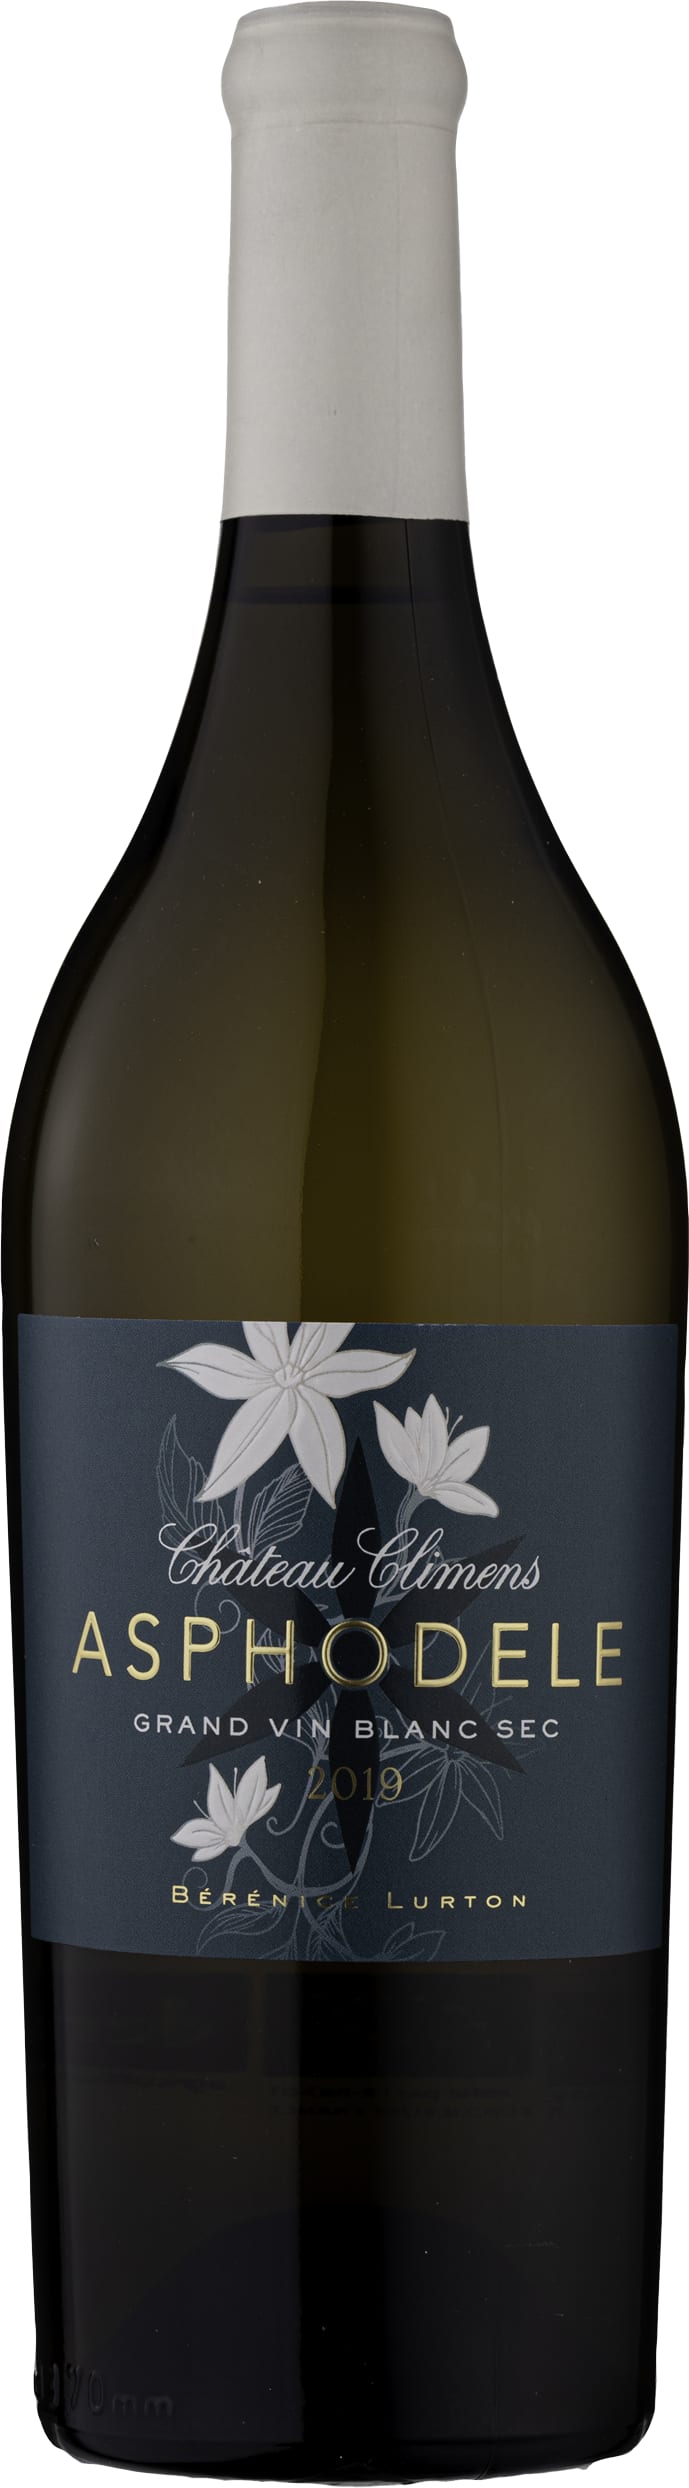 Chateau Climens Asphodele 2019 75cl - Buy Chateau Climens Wines from GREAT WINES DIRECT wine shop